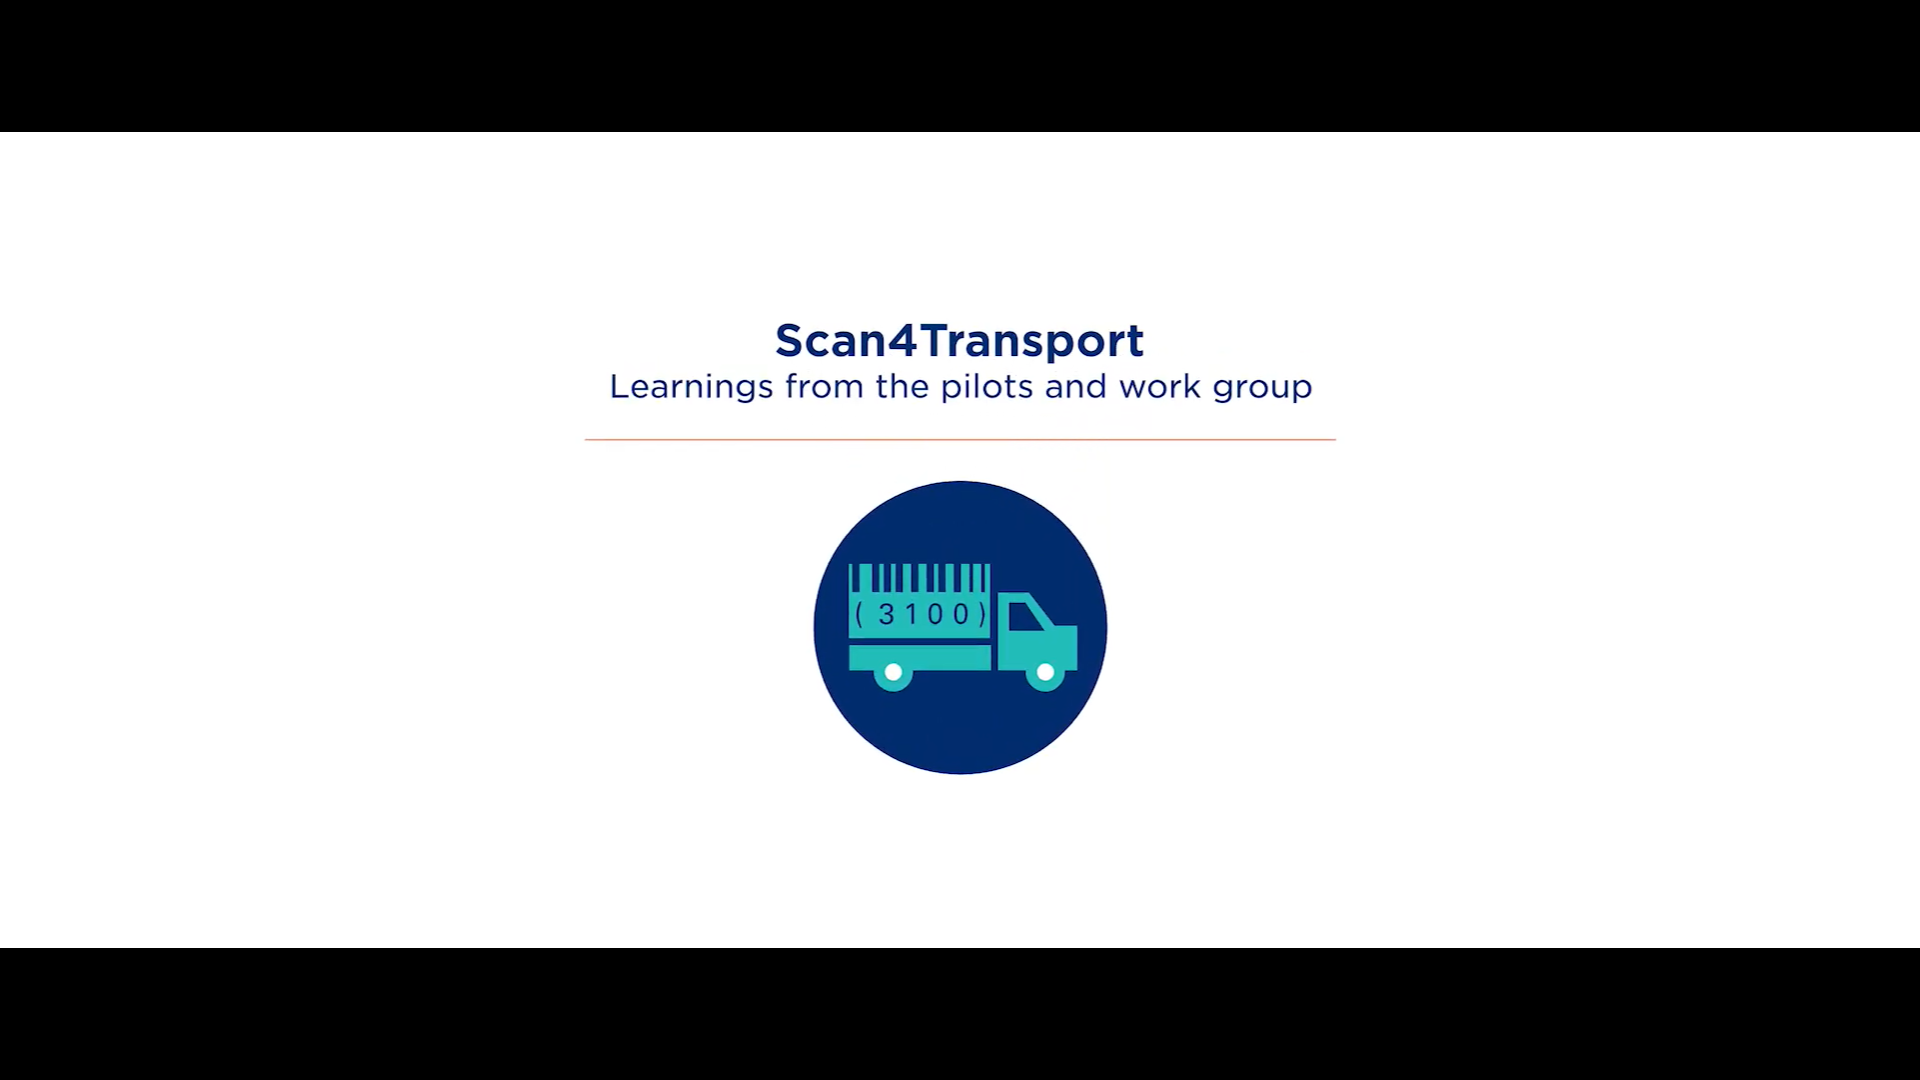 Scan4Transport - Learnings from the pilots and work group